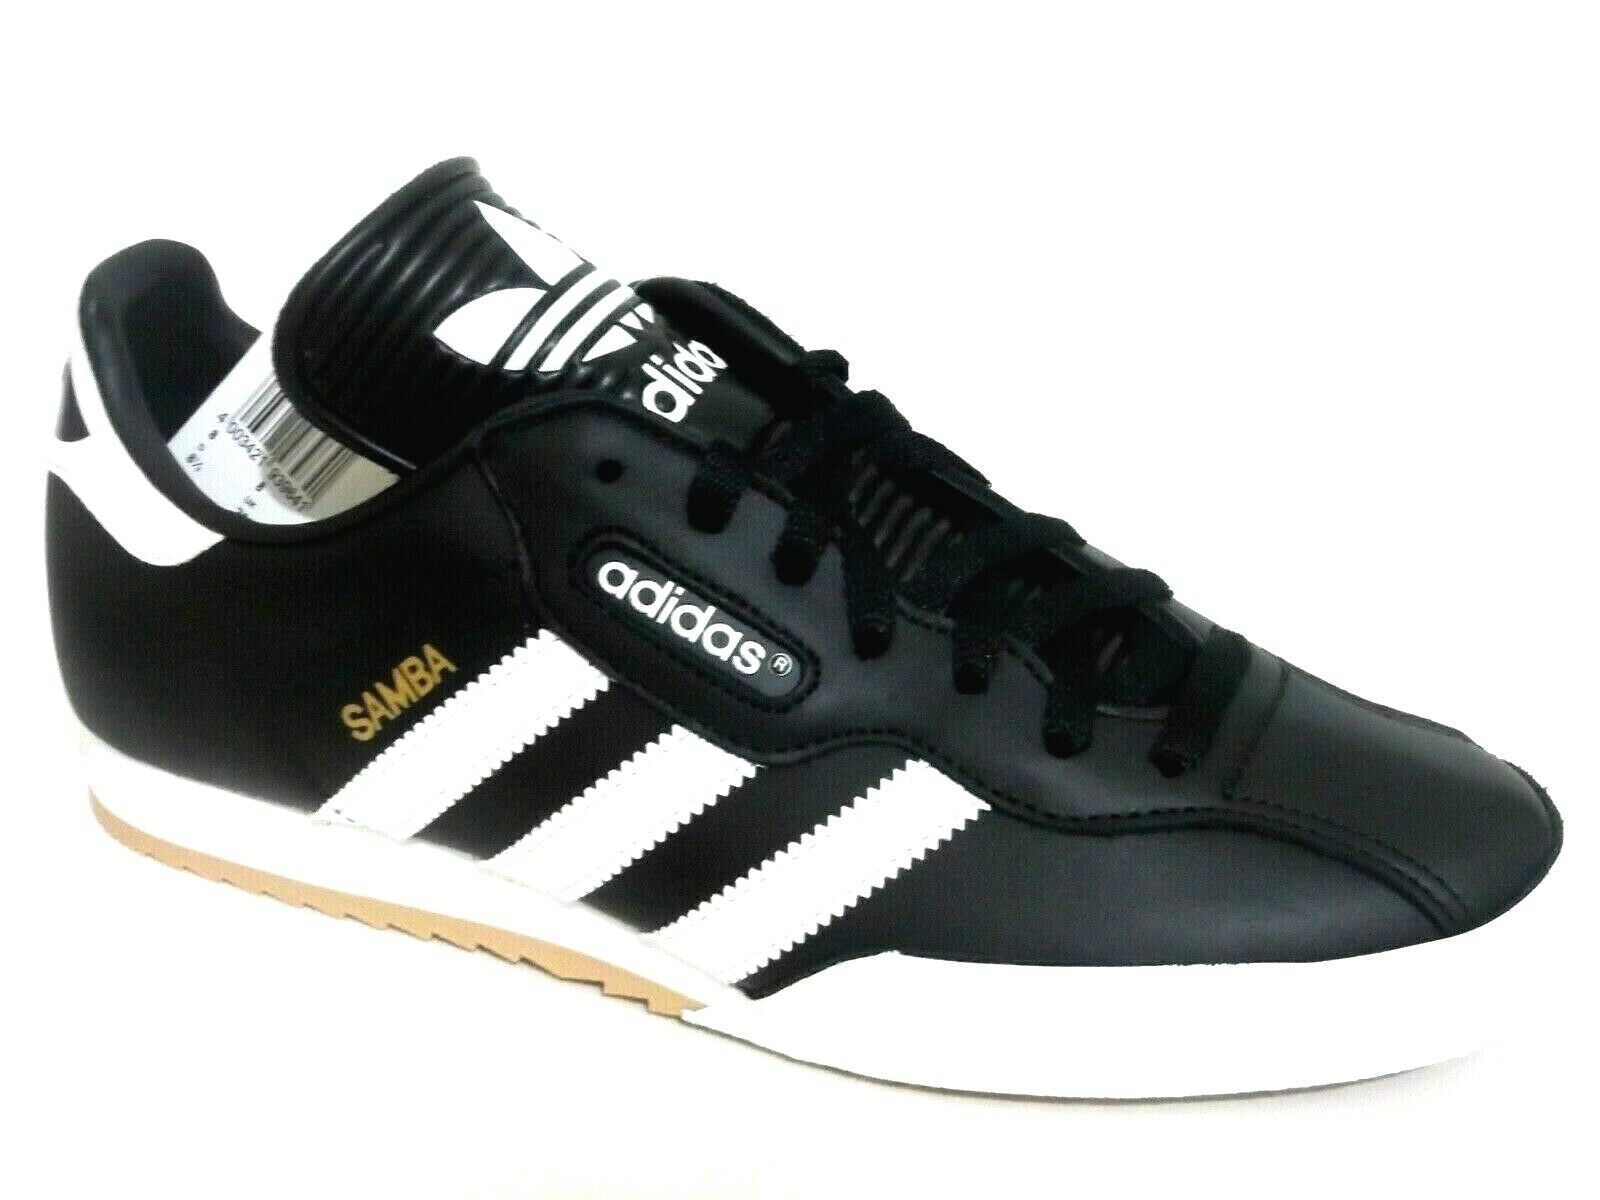 S Shoes Trainers Uk Size 7 To 12  019099  Black Leather